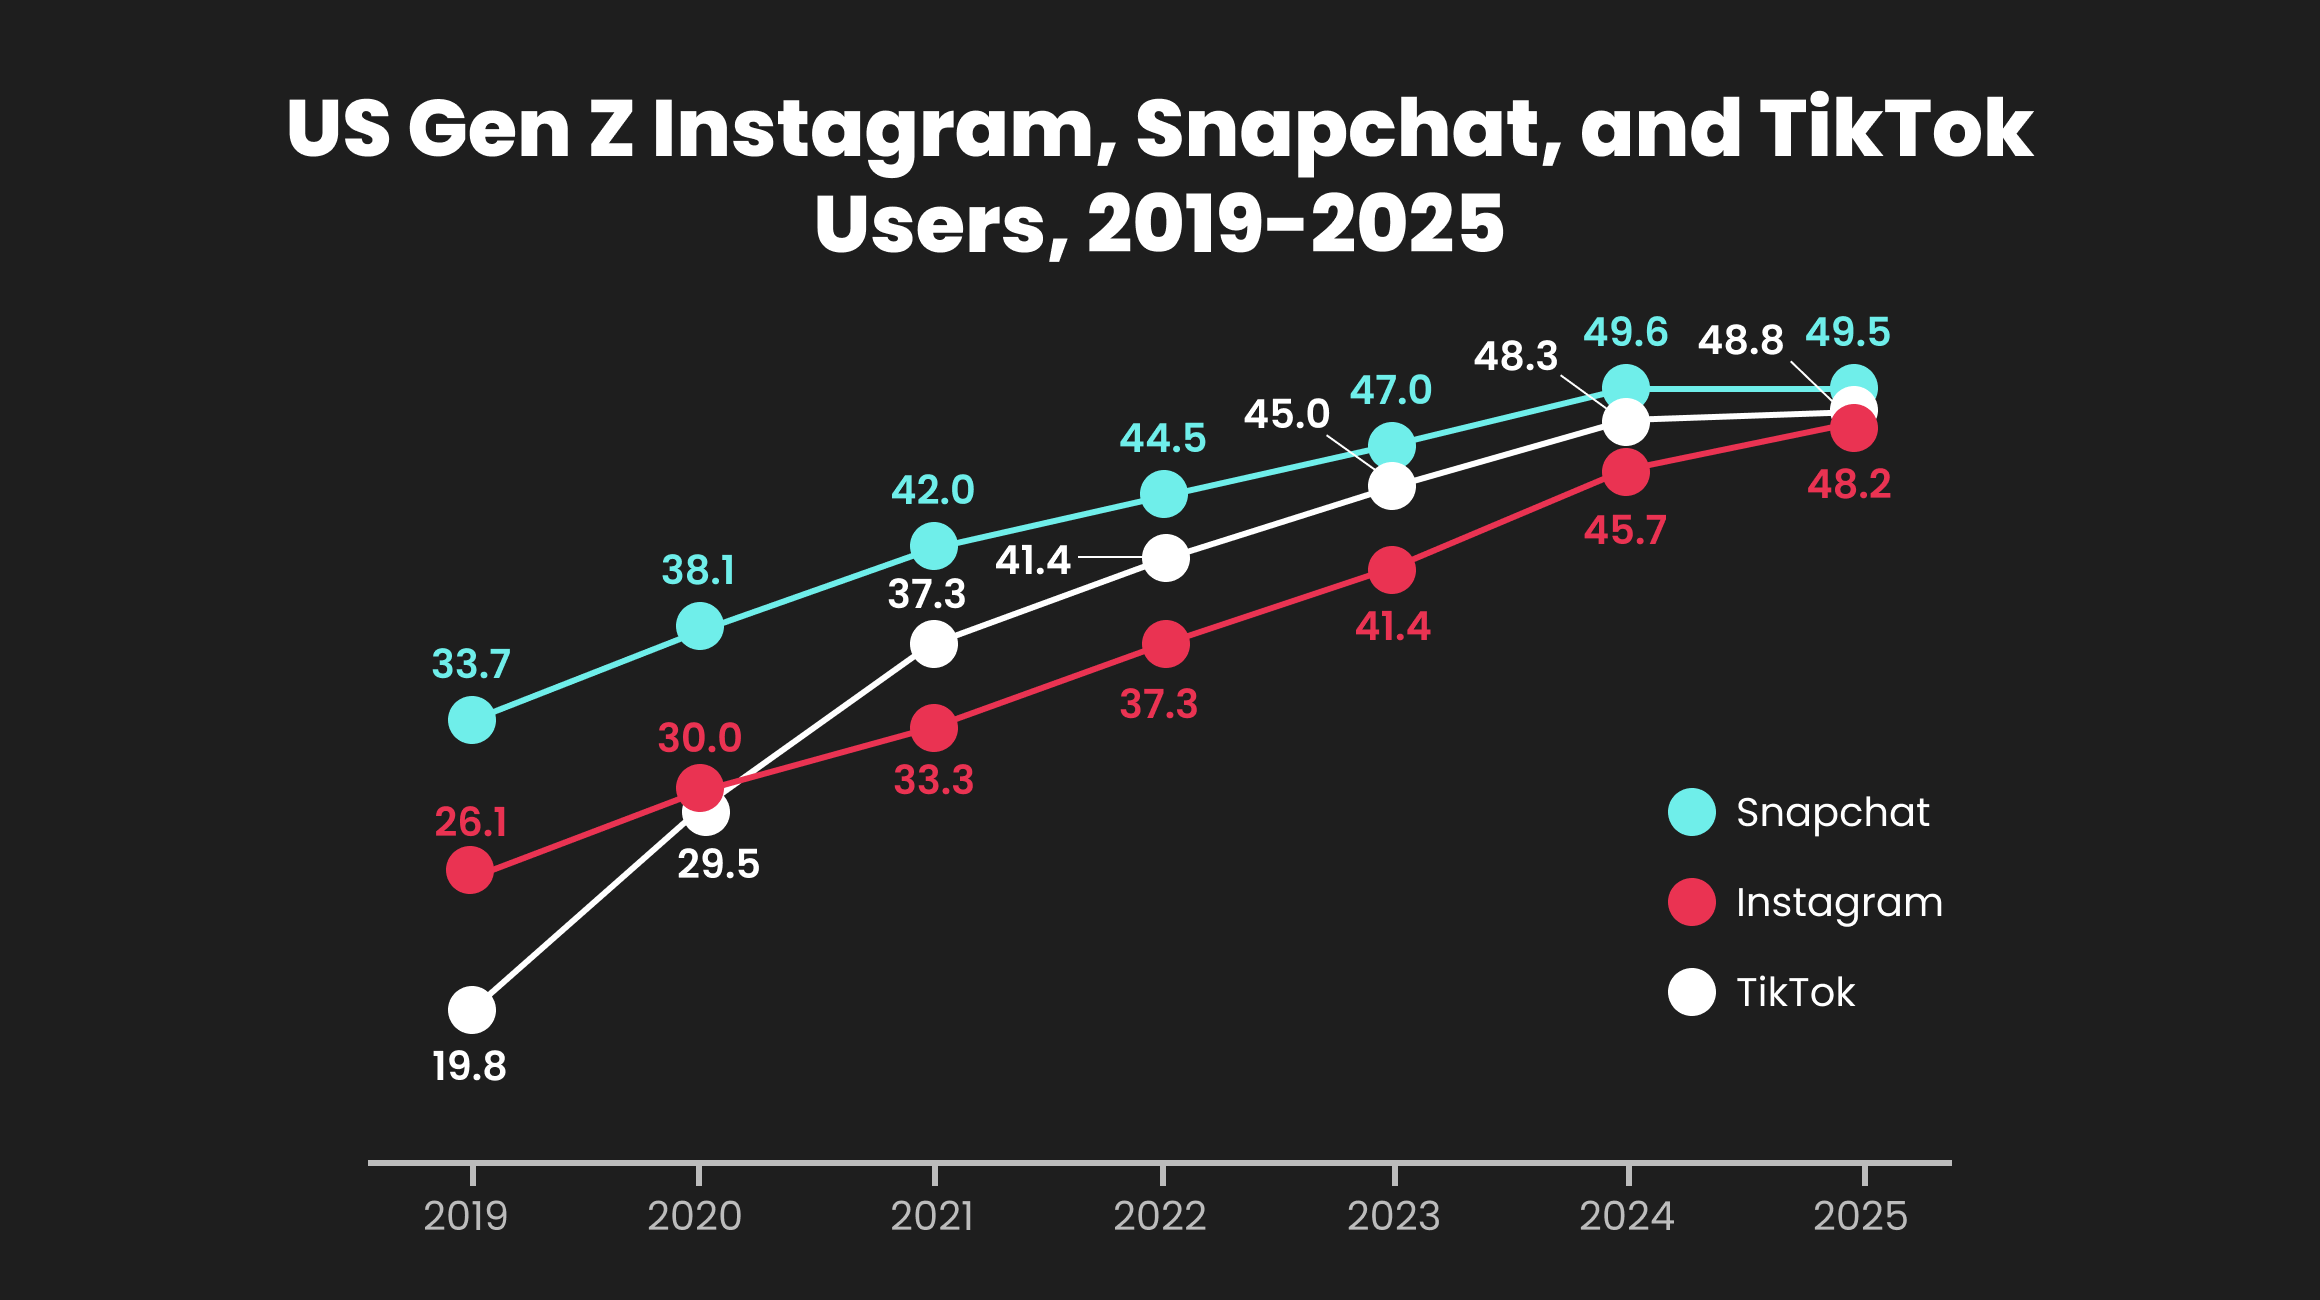 Number of Gen Z users in the United States on social media platforms